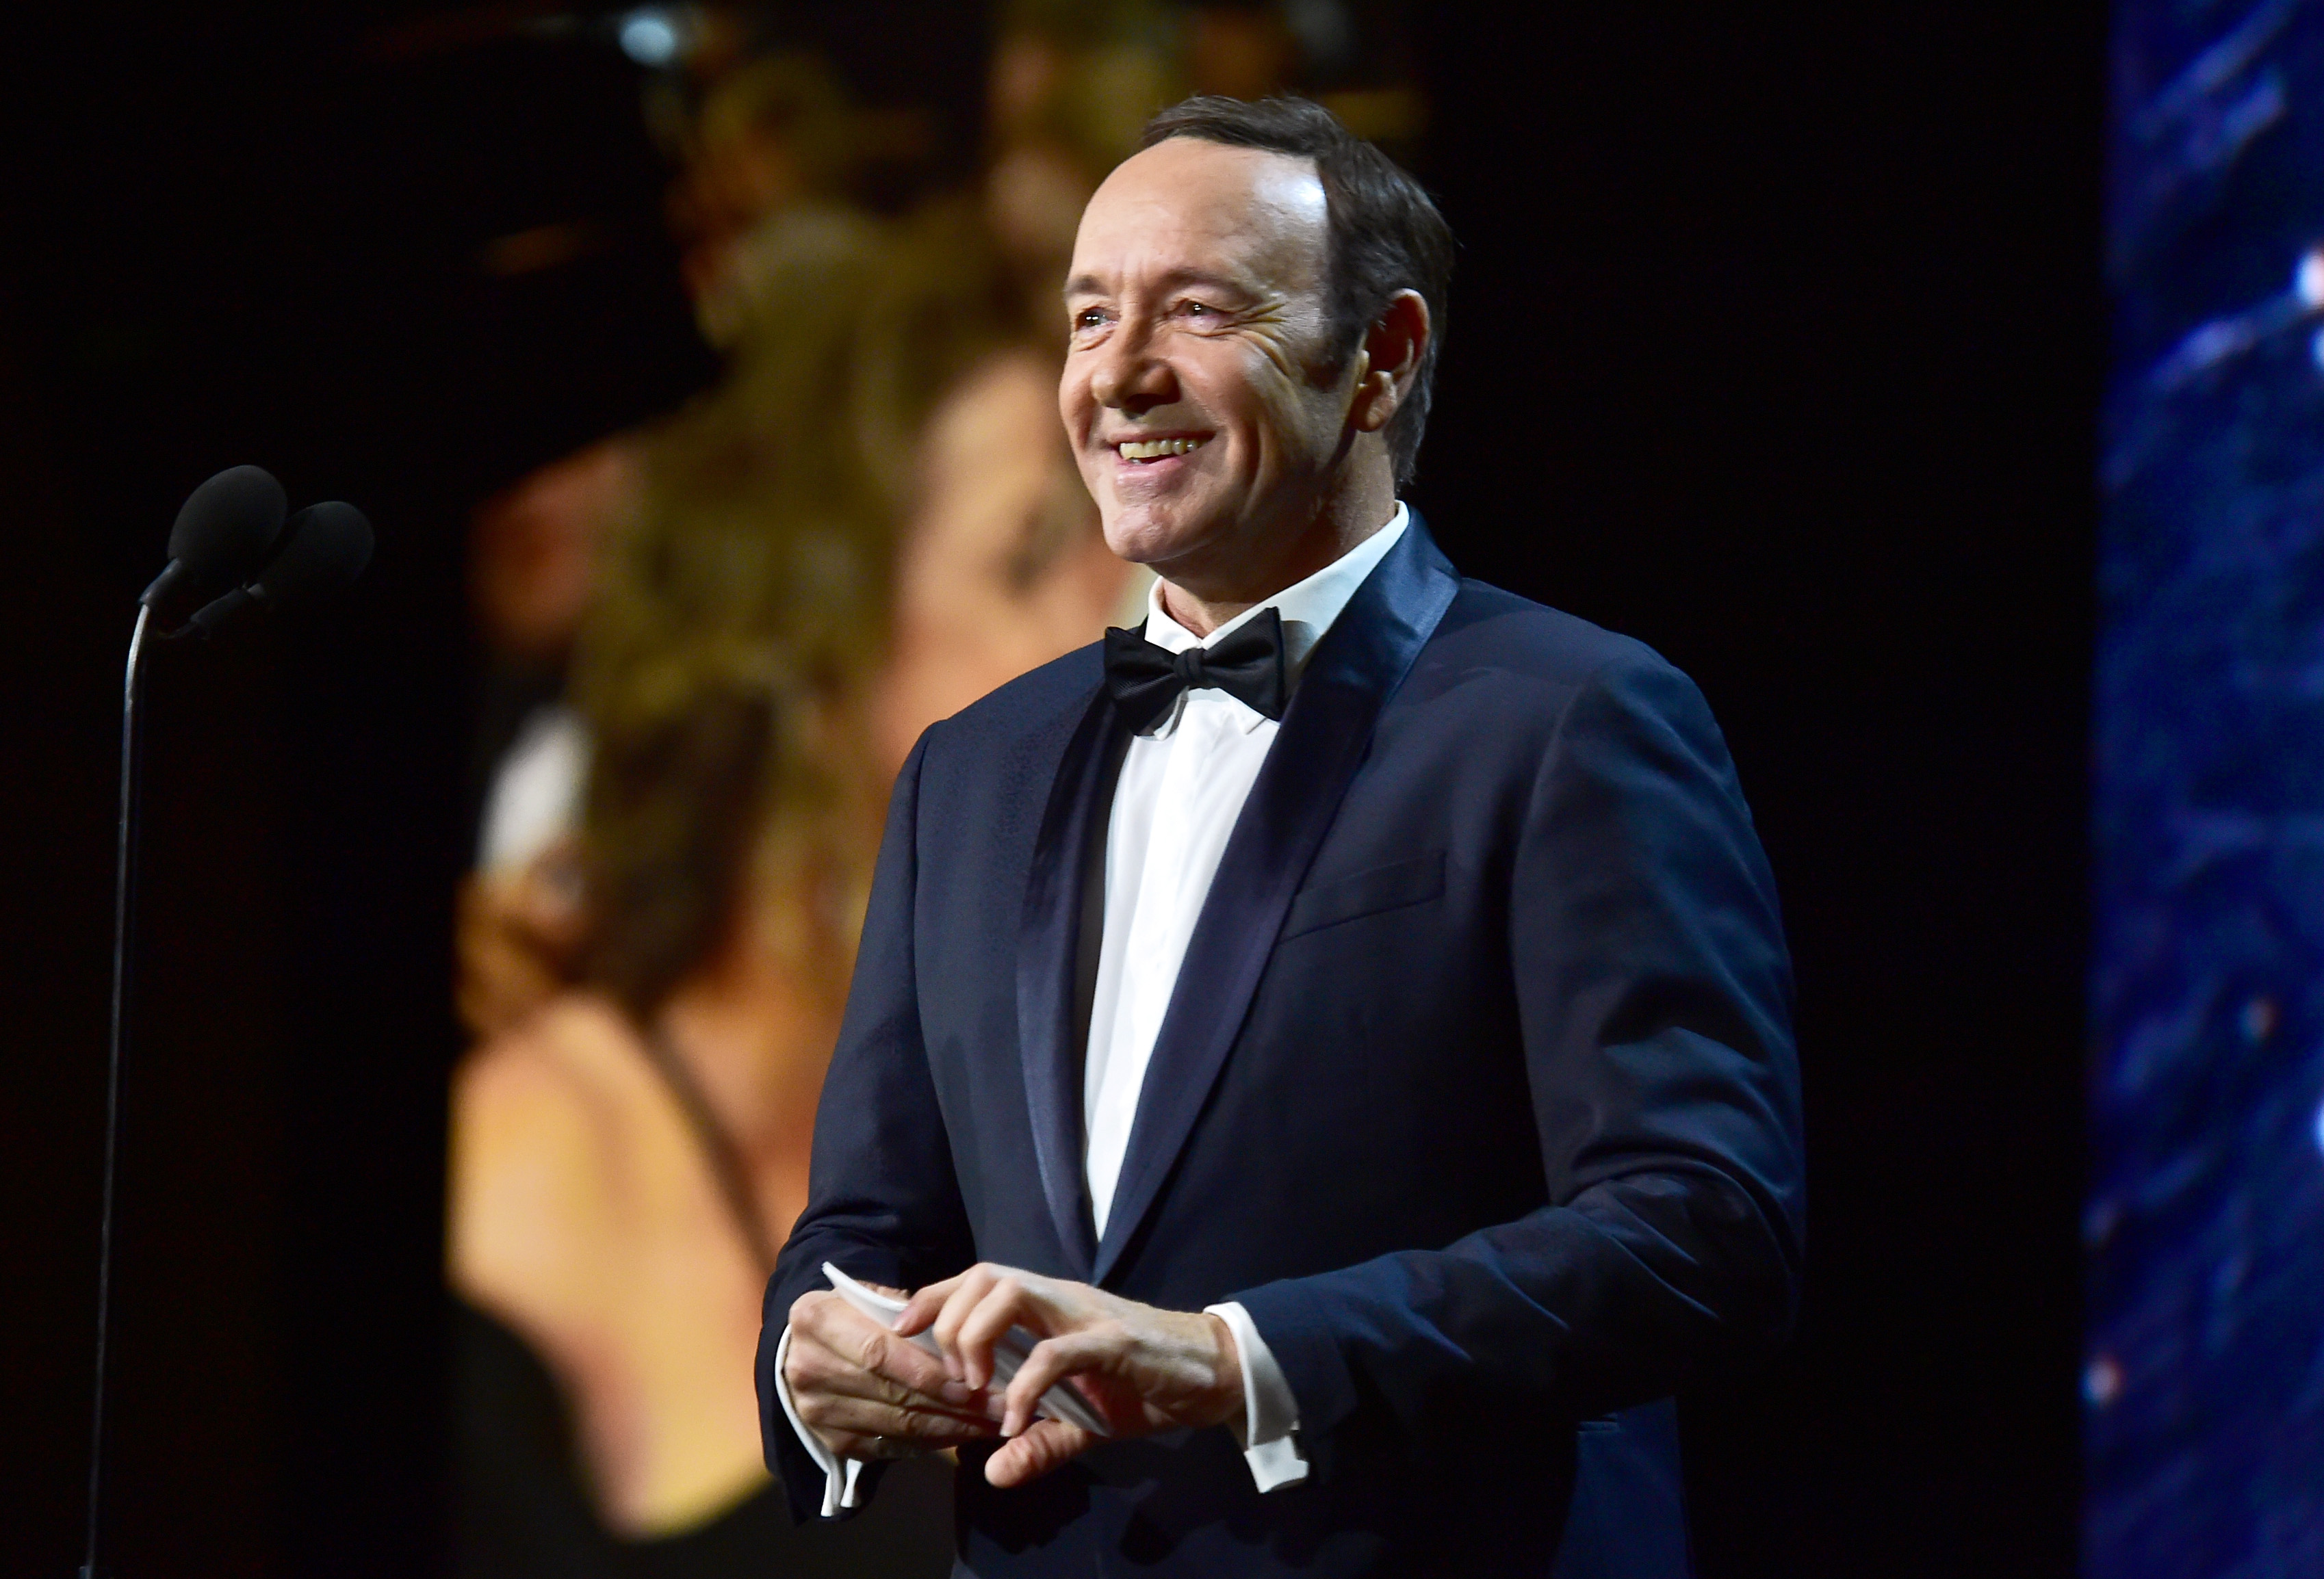 Kevin Spacey Breaks Silence in Strange Video, Faces Charge for Alleged Sexual Assault